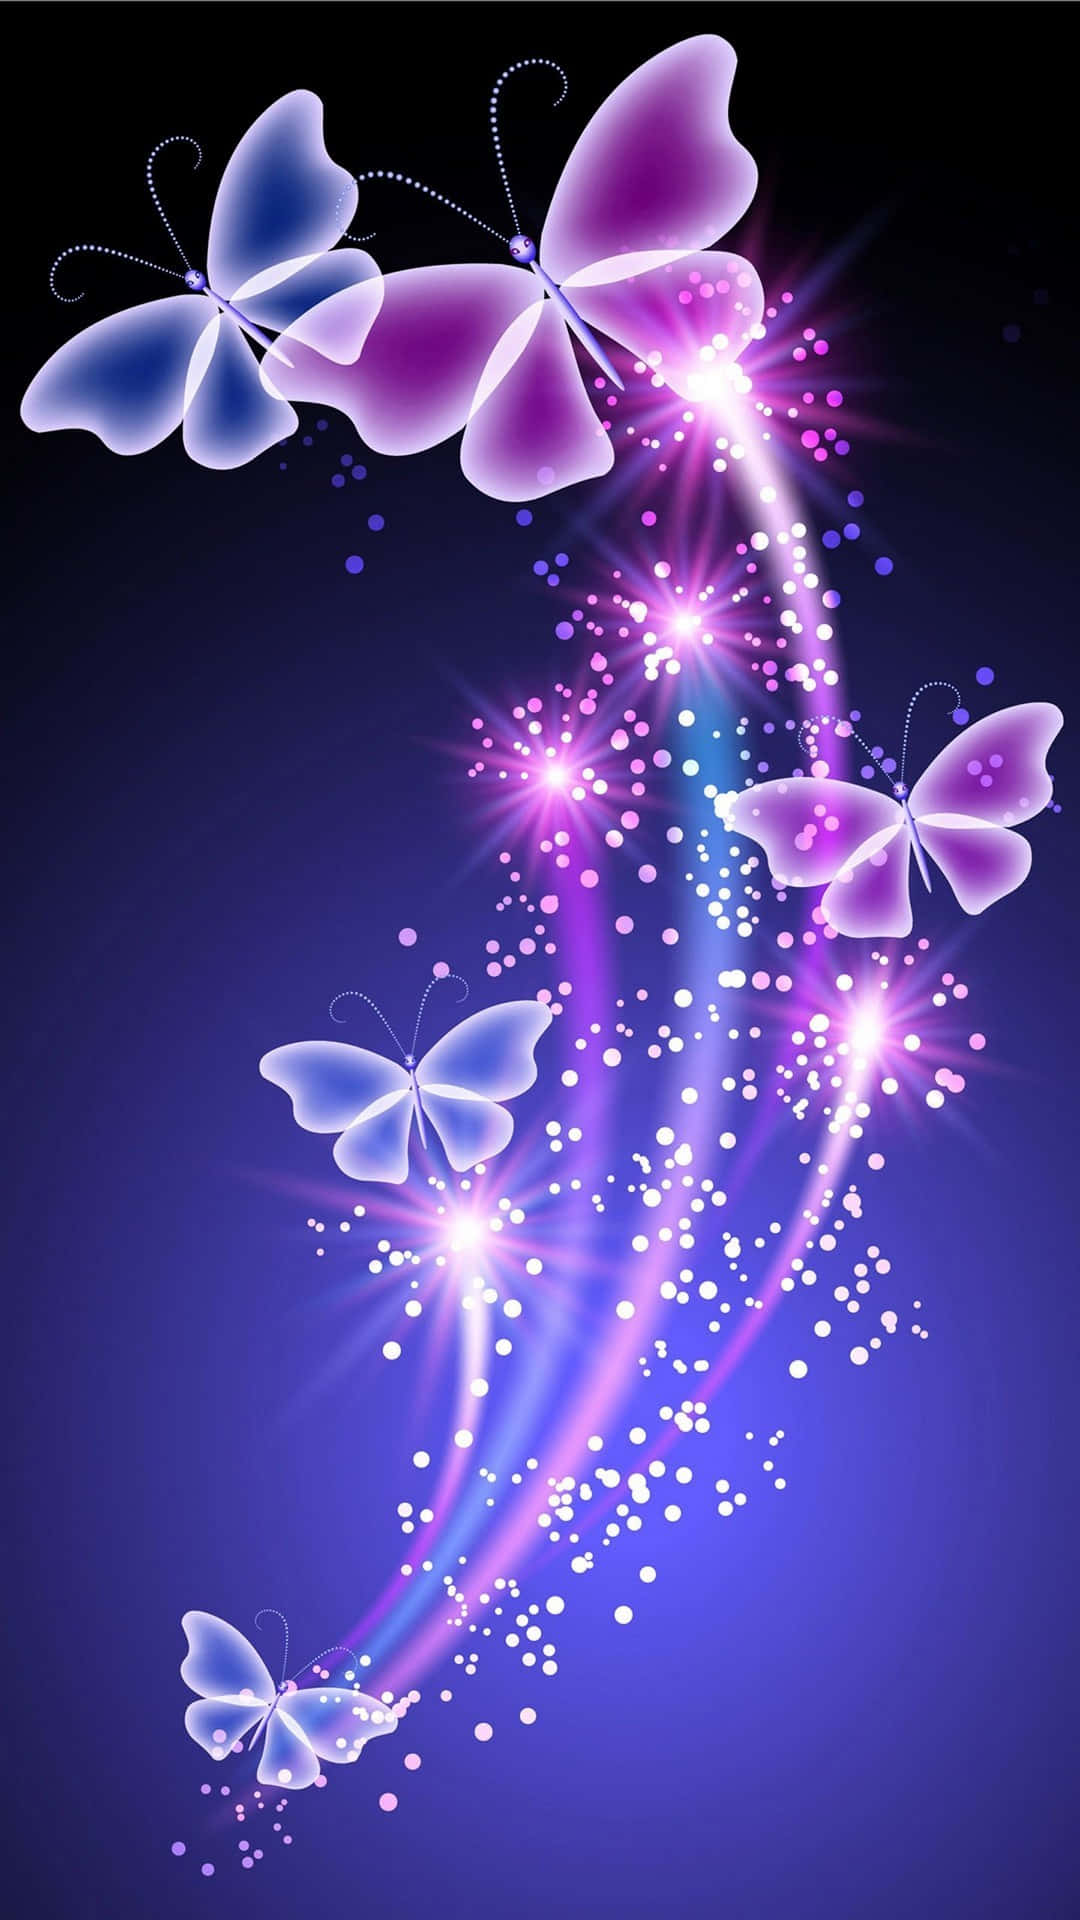 Experience Nature's Beauty With Purple Butterfly iPhone Wallpaper